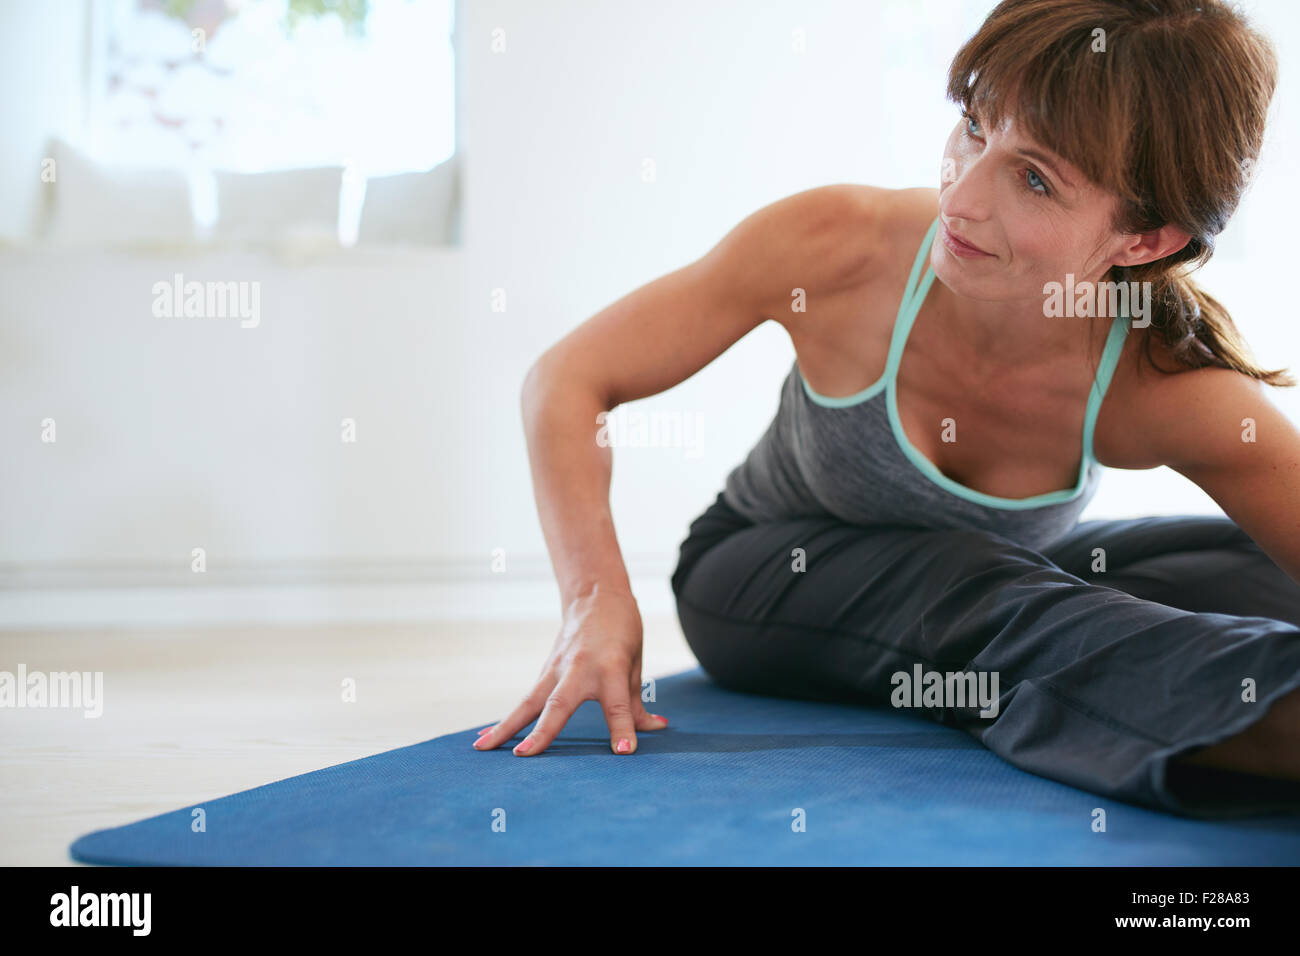 Image of woman bending forward doing yoga . Fitness woman practicing yoga on exercise mat at gym looking away. Stock Photo